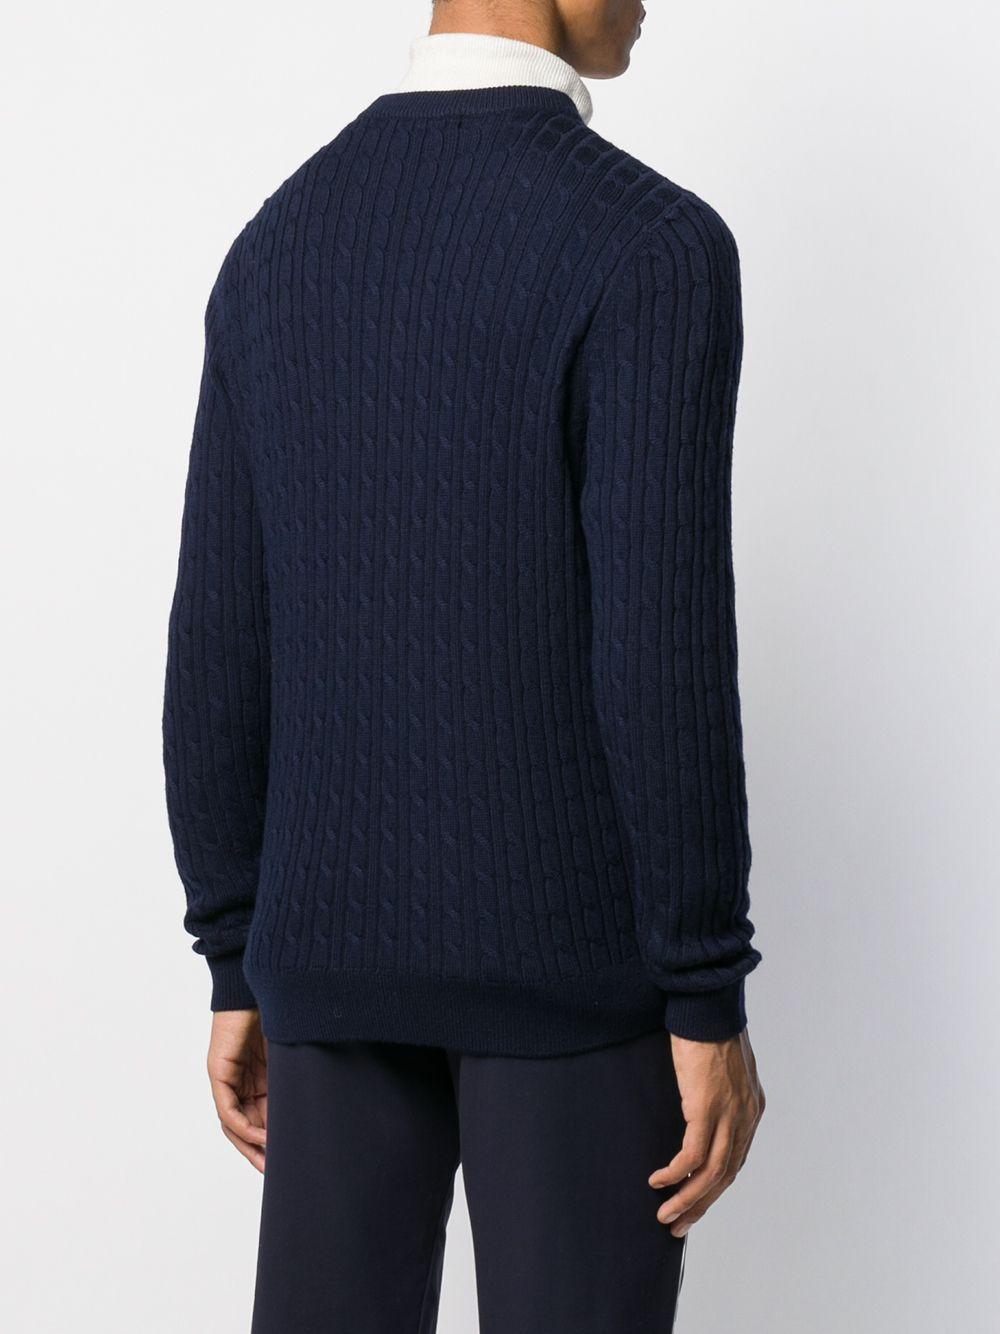 Perfect Moment Wool Polar Bear Crewneck Sweater in Blue for Men - Lyst